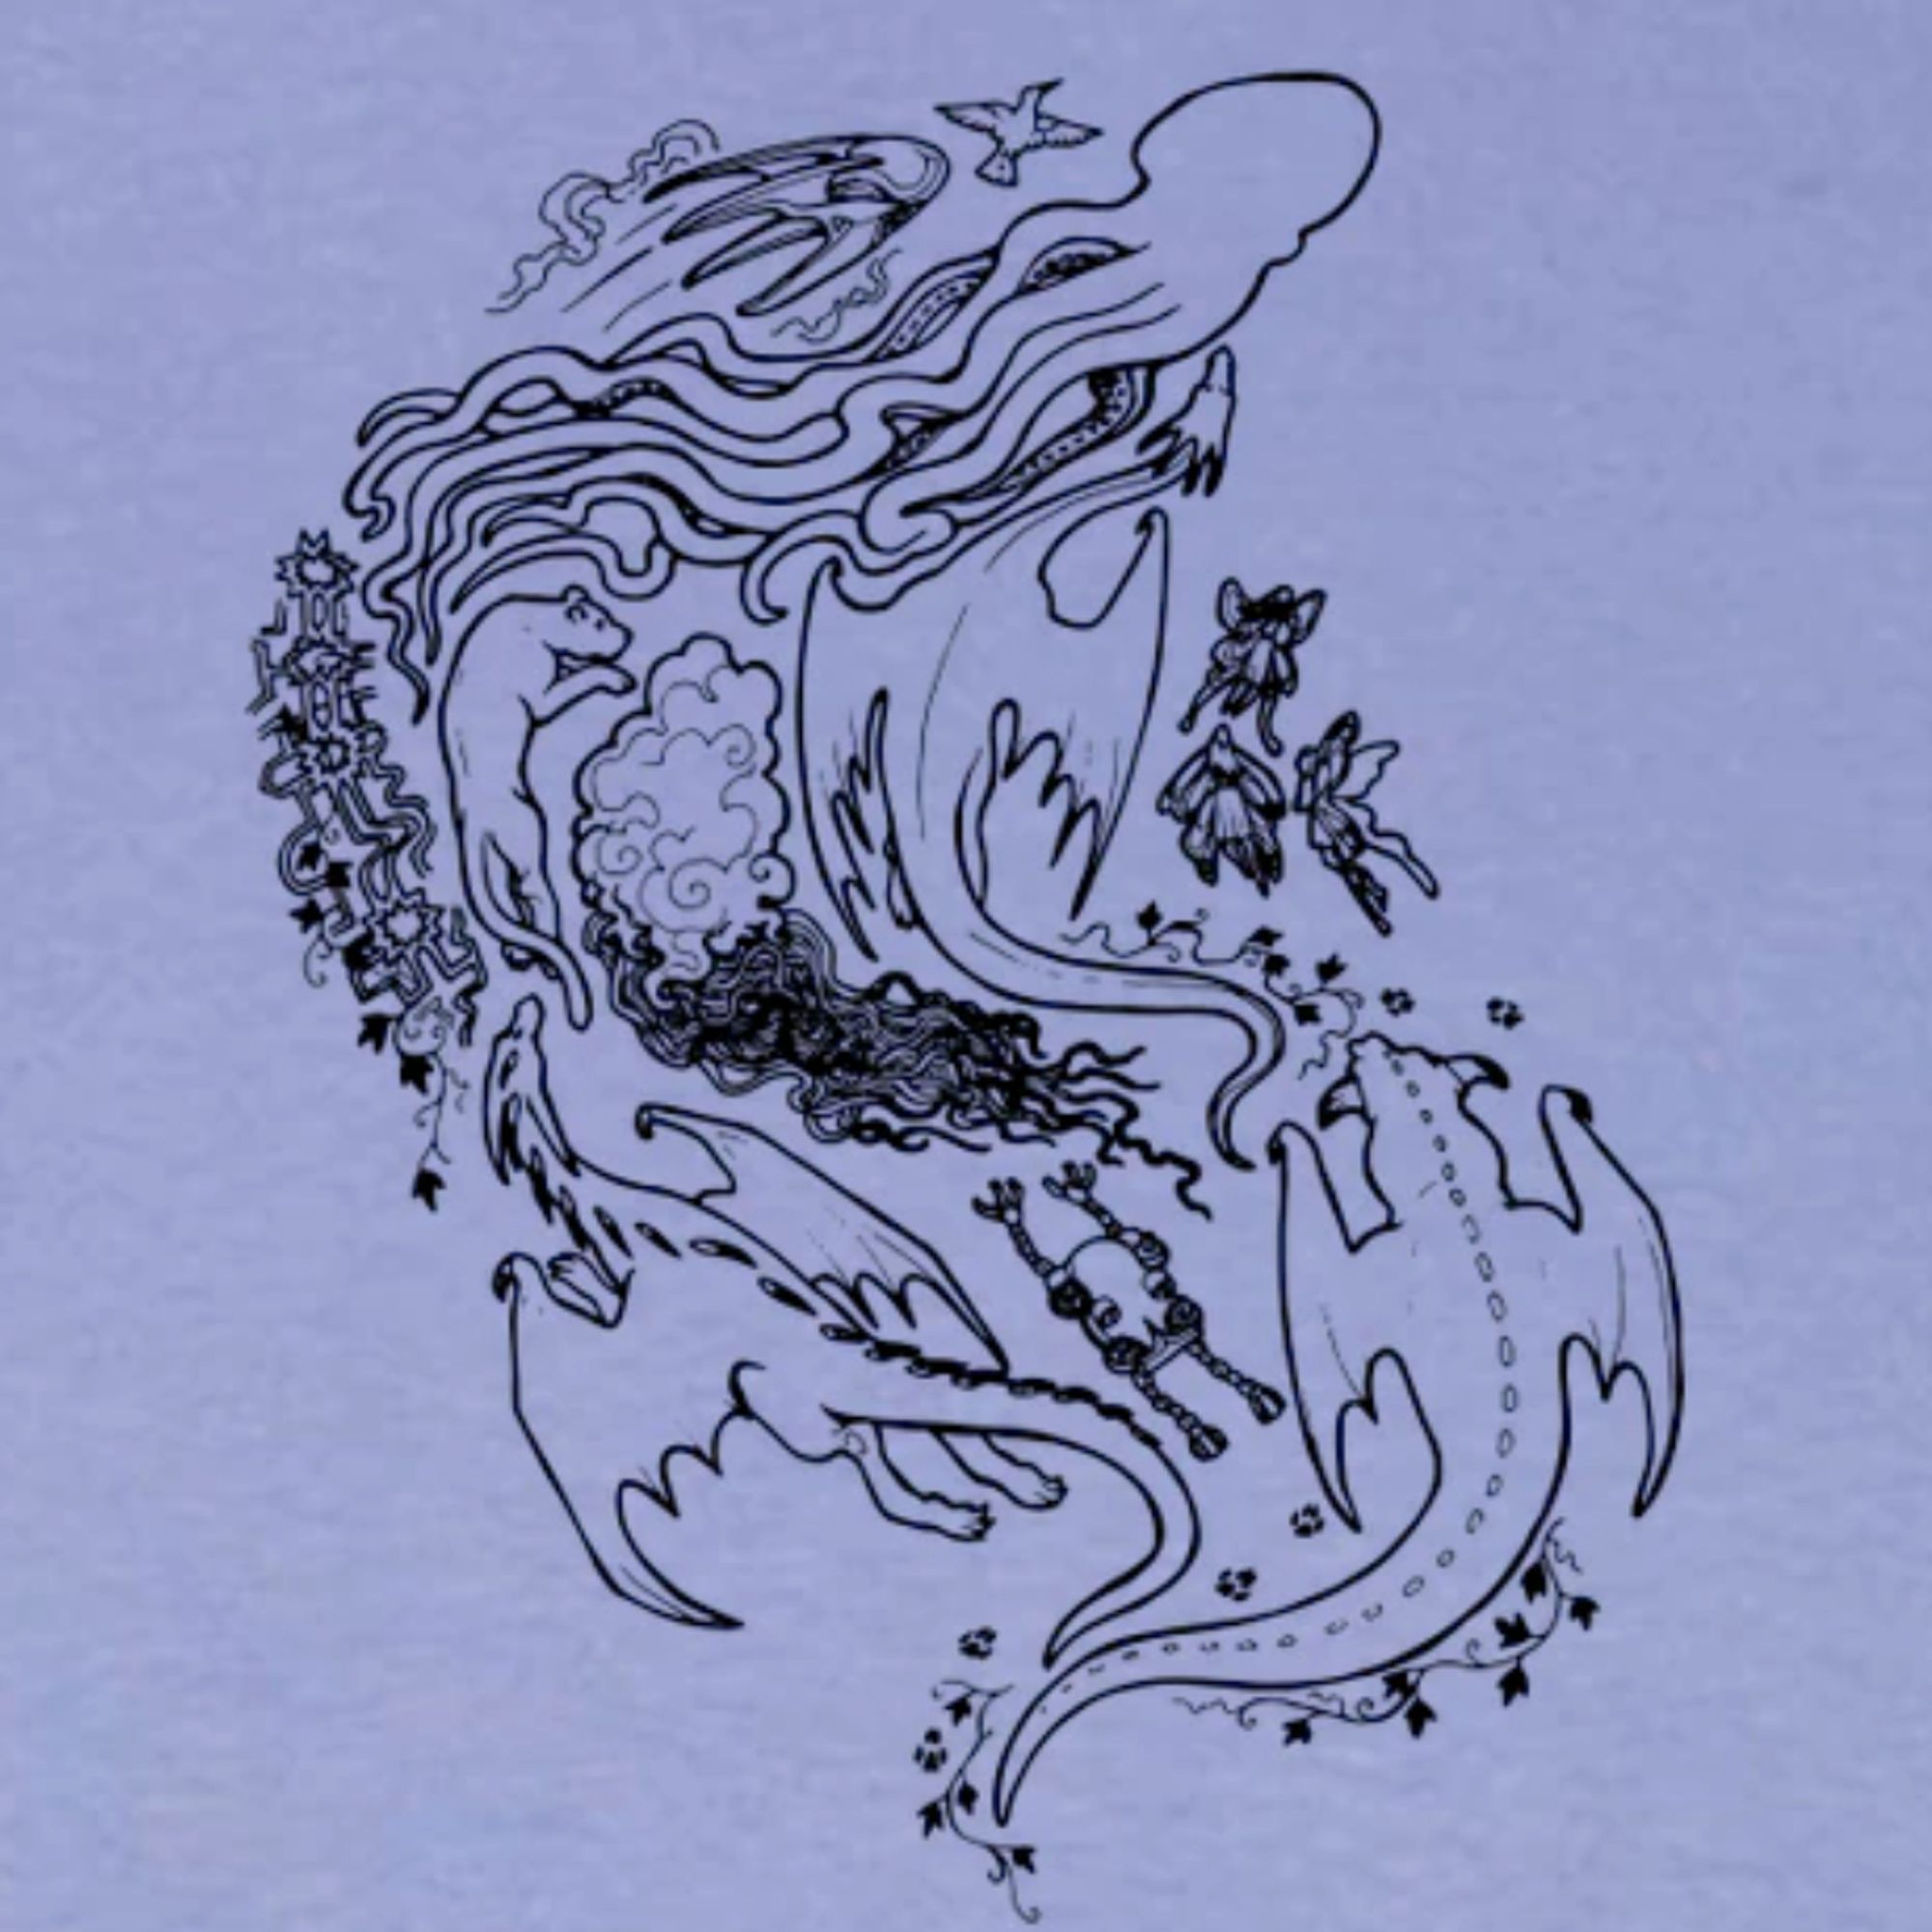 Illustration on the Atthis Arts shirts, created by Matthew Spencer